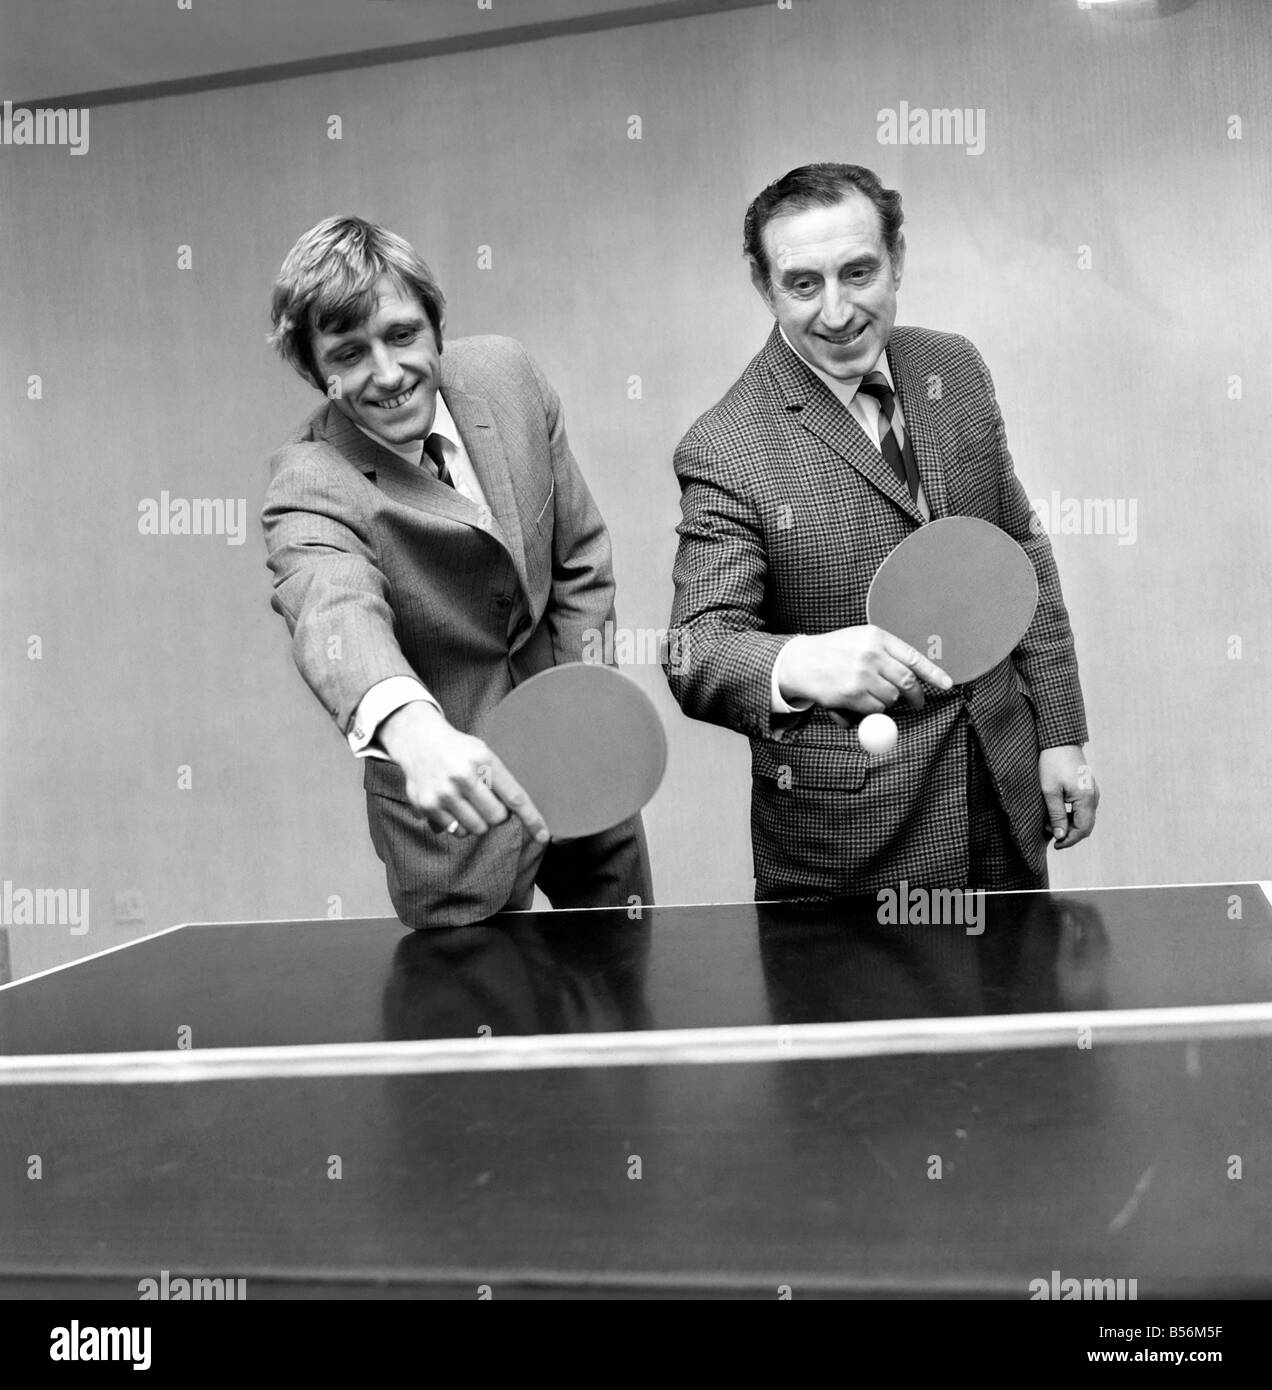 Keith Newton the Blackburn Rovers player signed for Everton yesterday. Keith Newton plays a shot when partnering his new boss Harry Catterick, manager of Everton, with a game of table tennis after signing. December 1969 ;Z12172 Stock Photo